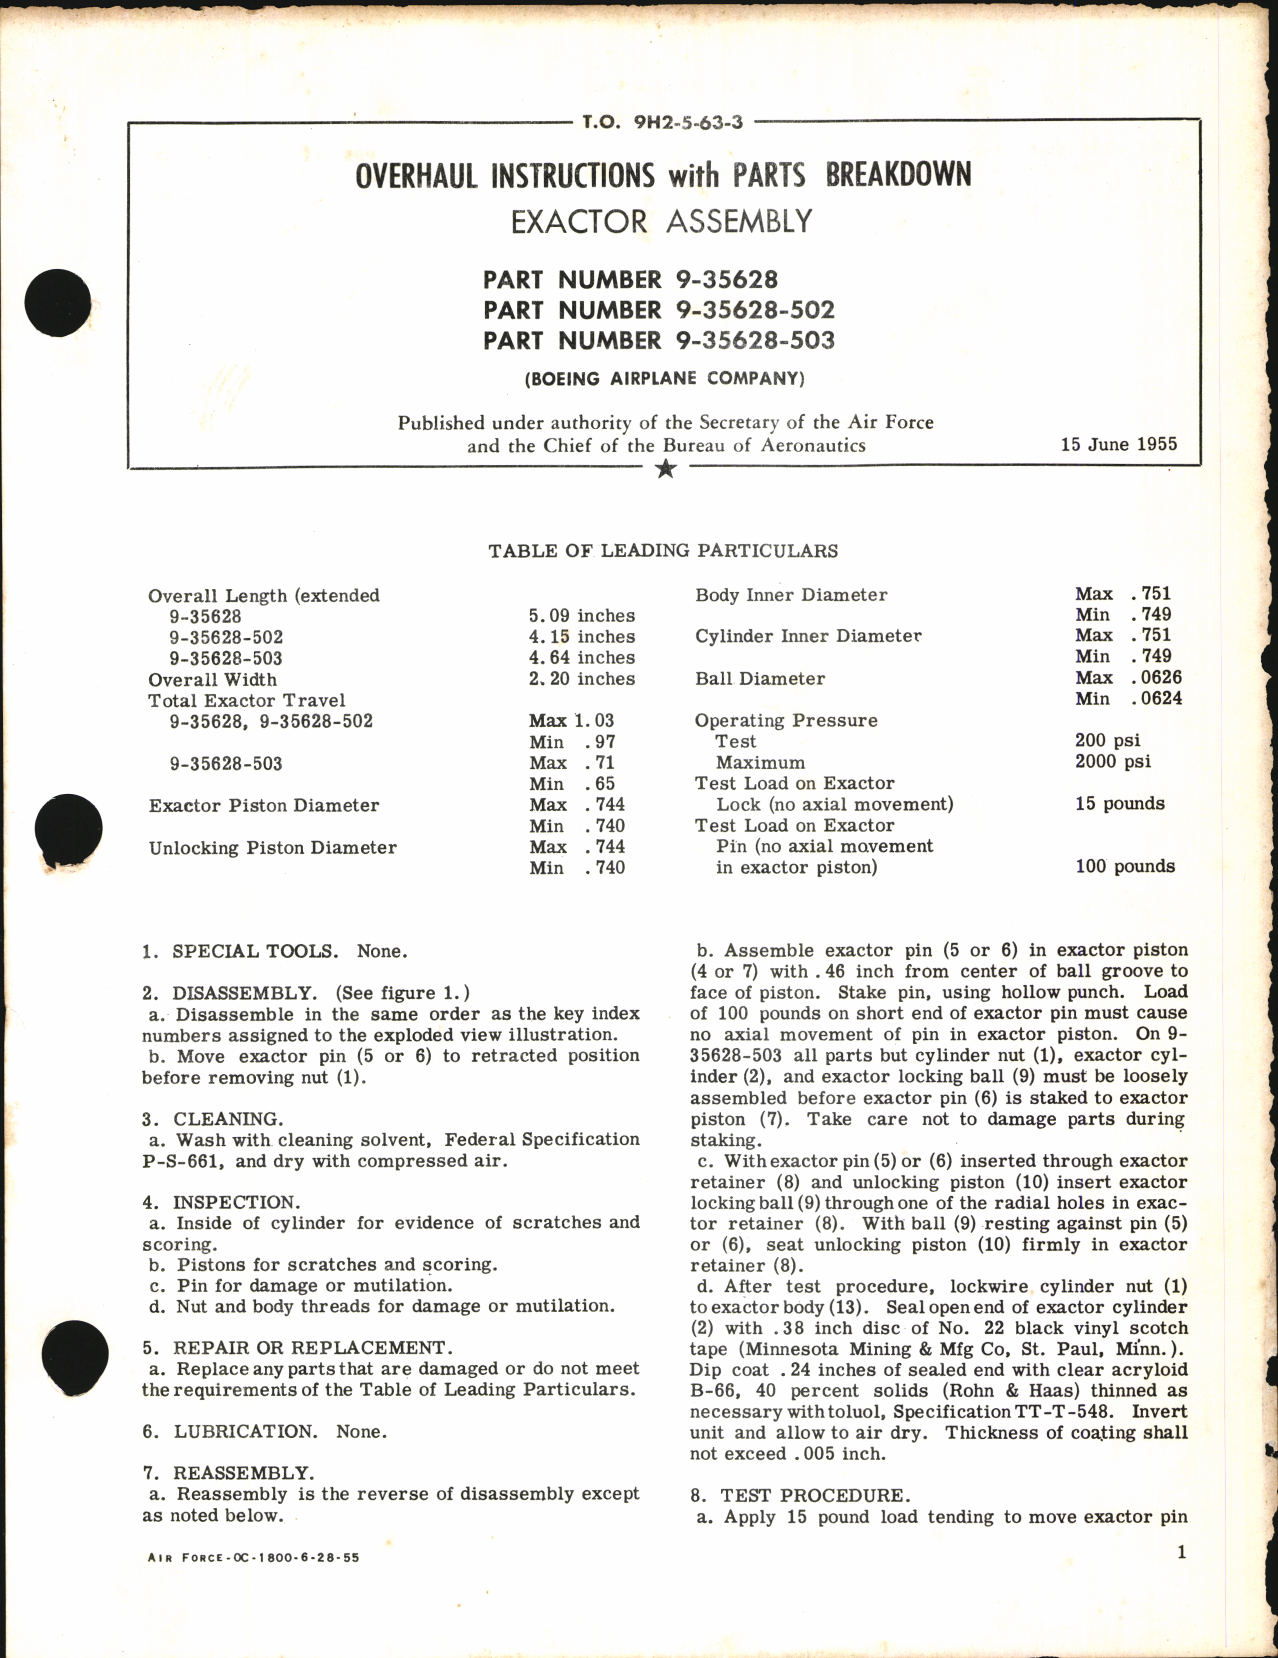 Sample page 1 from AirCorps Library document: Overhaul Instructions with Parts Breakdown for Extractor Assembly